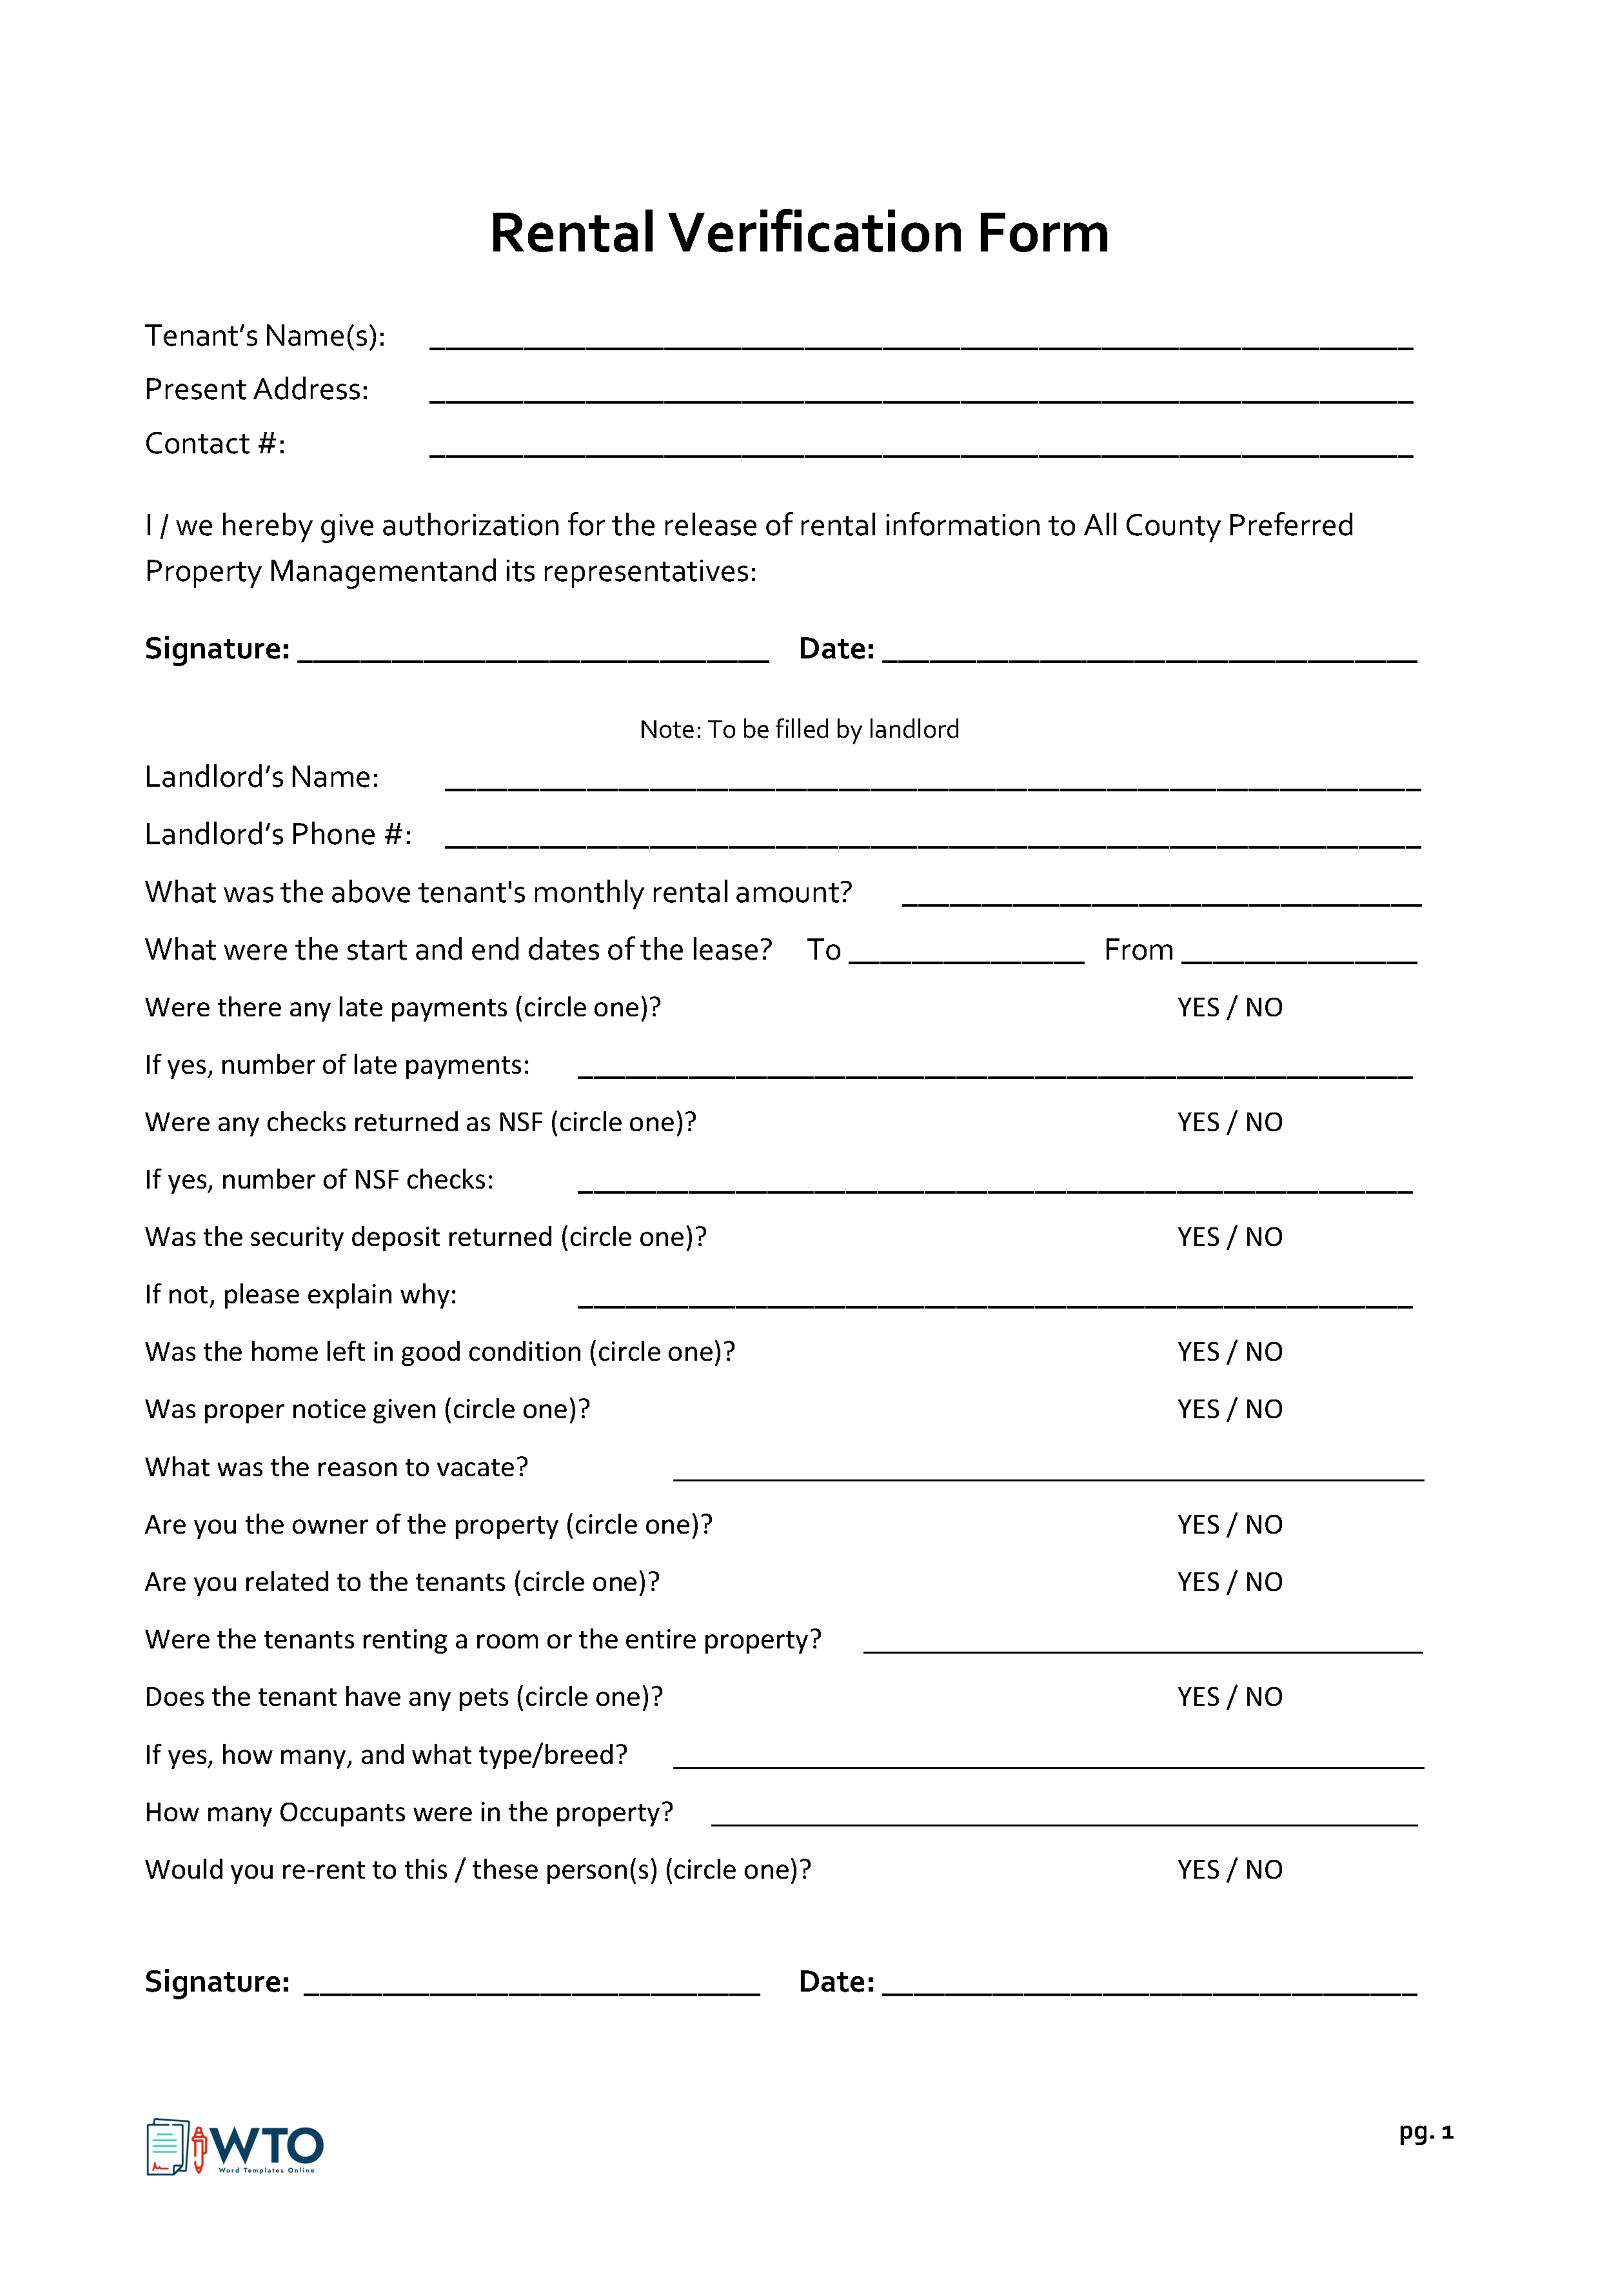 Rent Verification Form Template with Samples